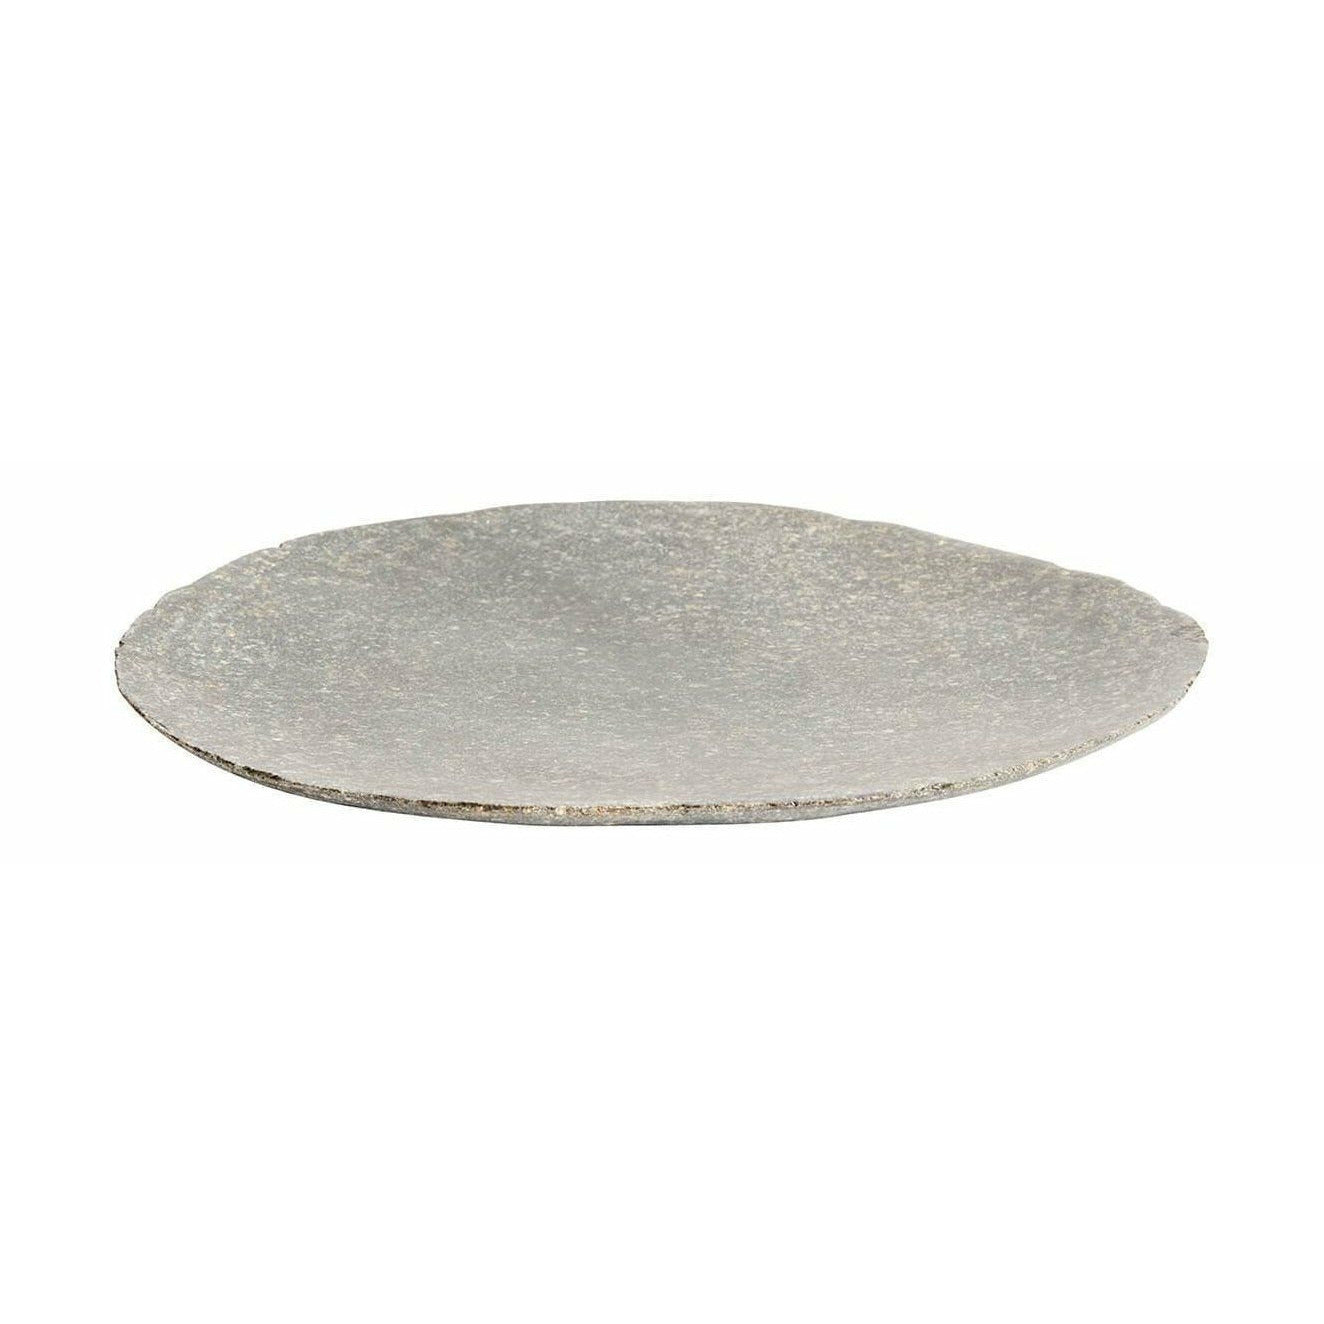 Muubs Valley The Dinner Plate Riverstone, 28 cm